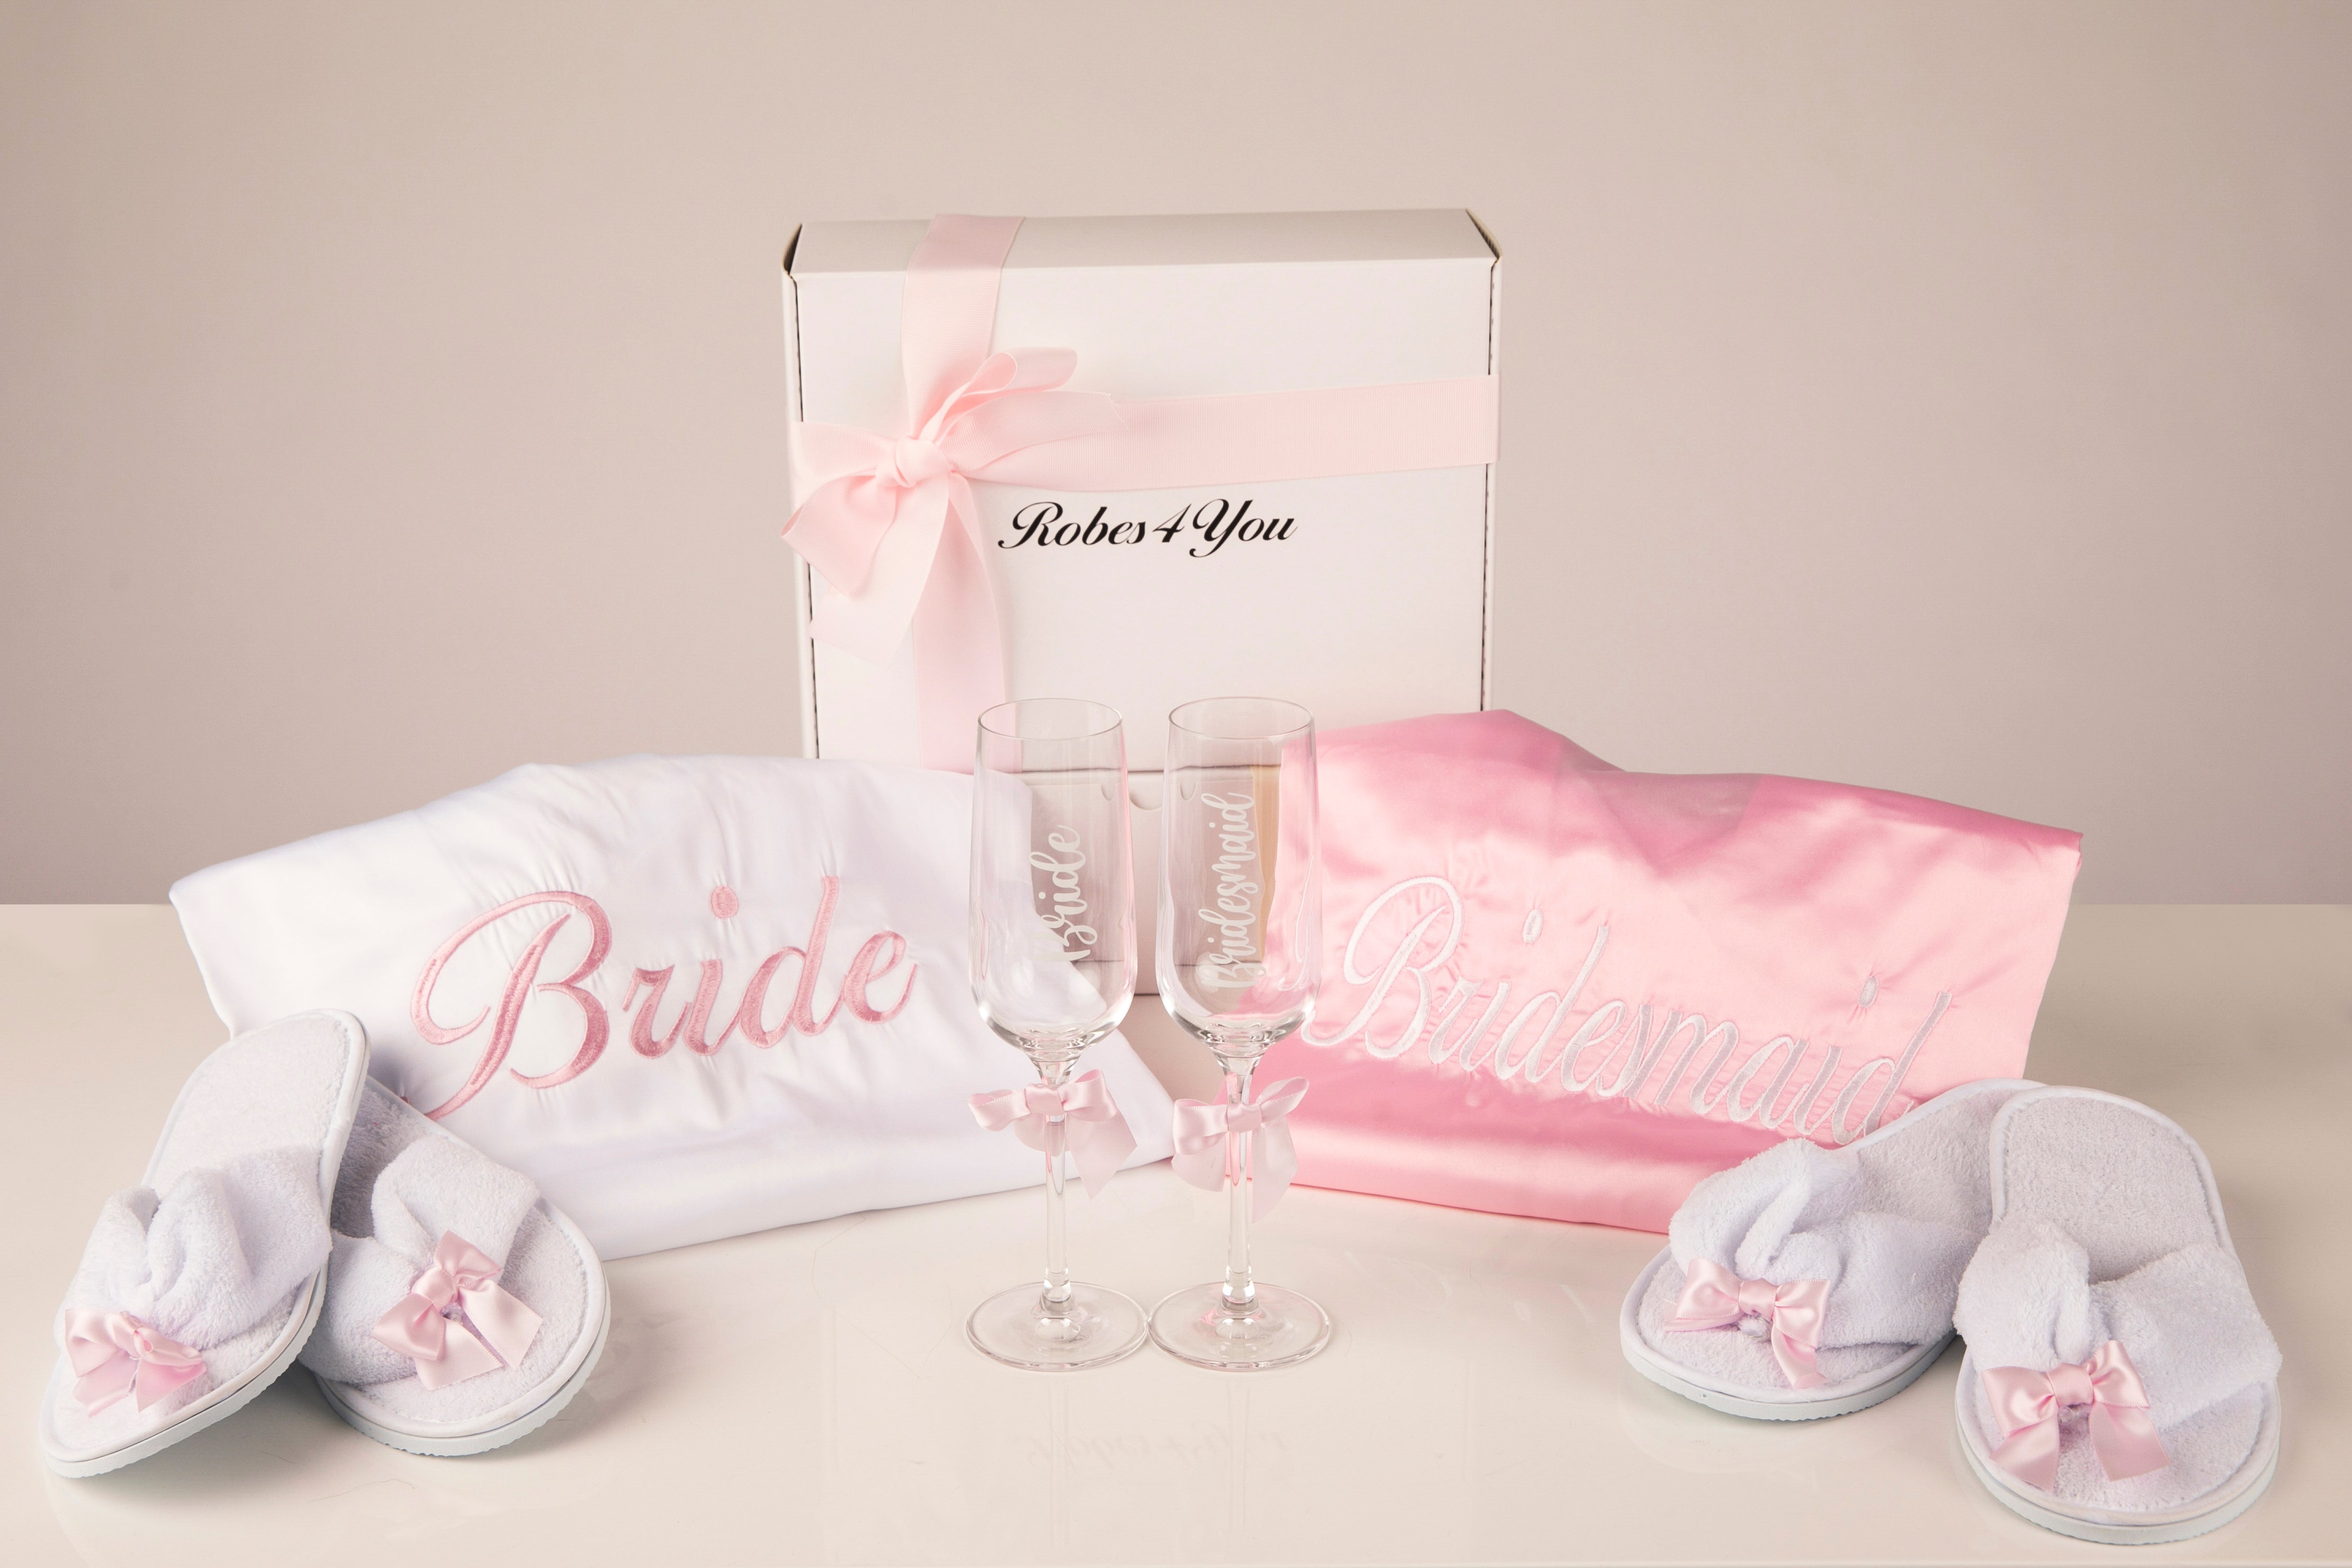 White and baby pink bridal robes in gift box UK-Robes4you 